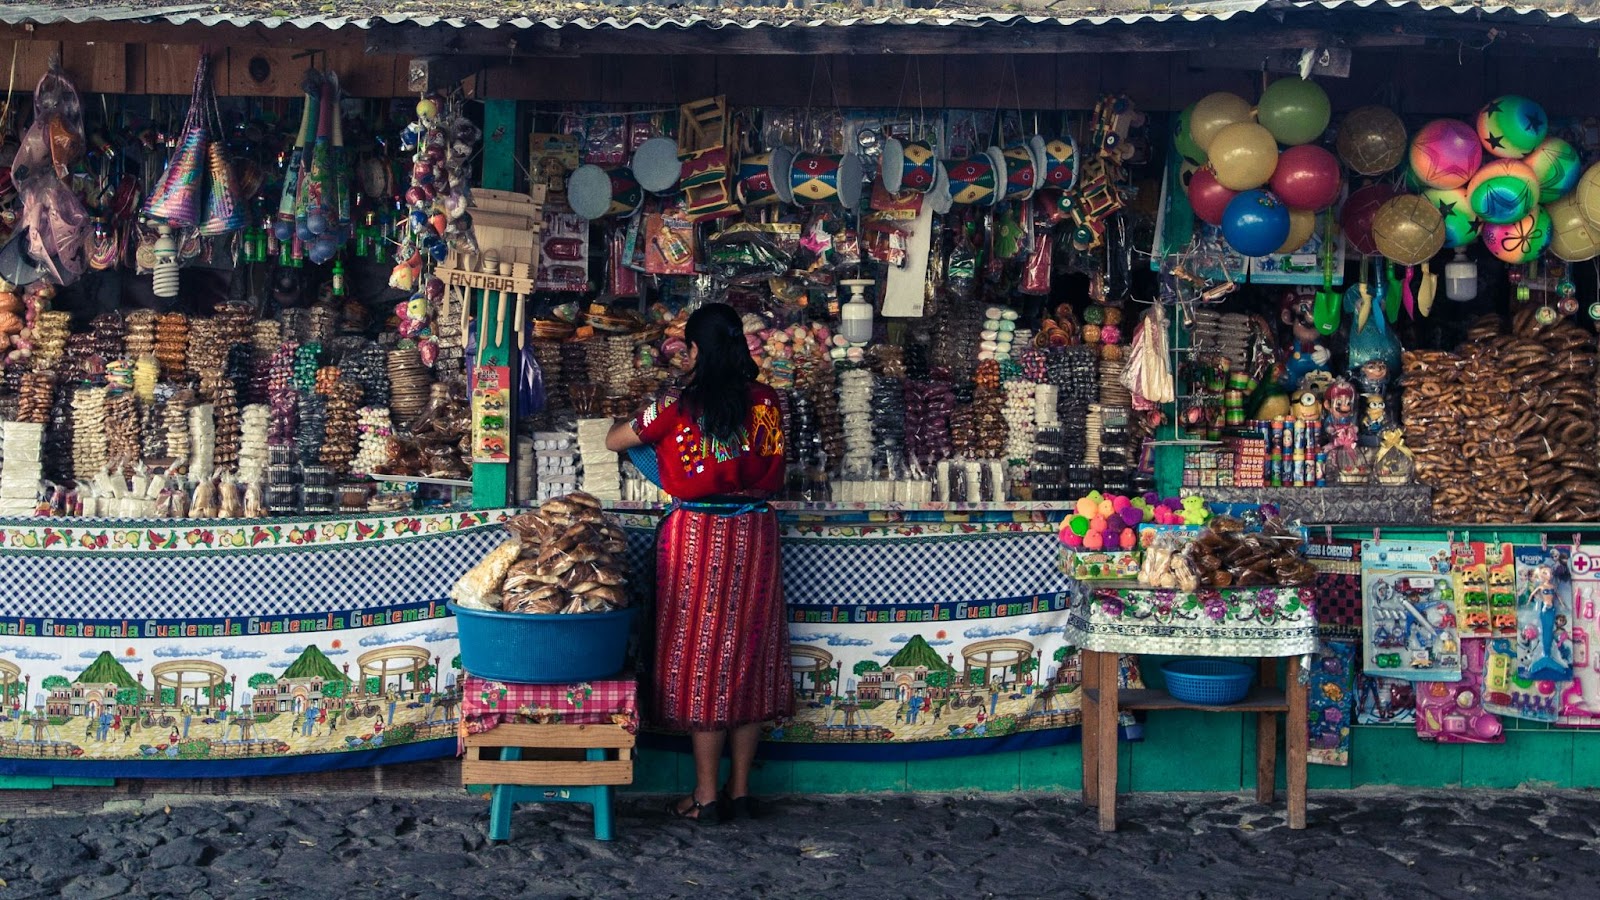 Travelers can save money by visiting Guatemala during the dry season. 
pictured: a local market in Guatemala